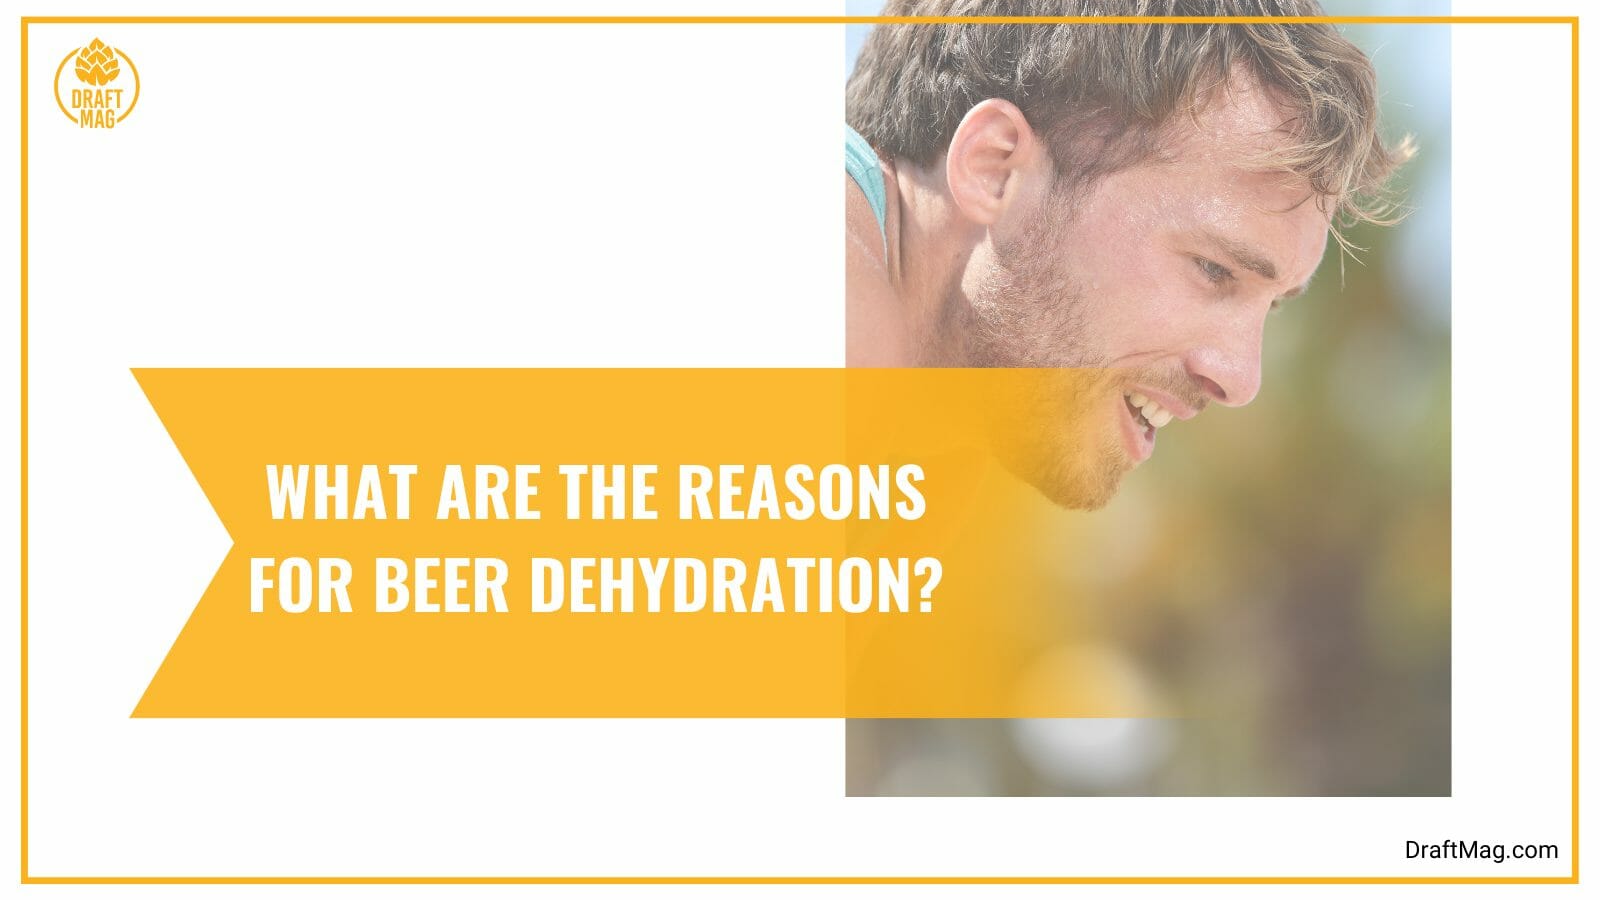 Reasons for beer dehydration